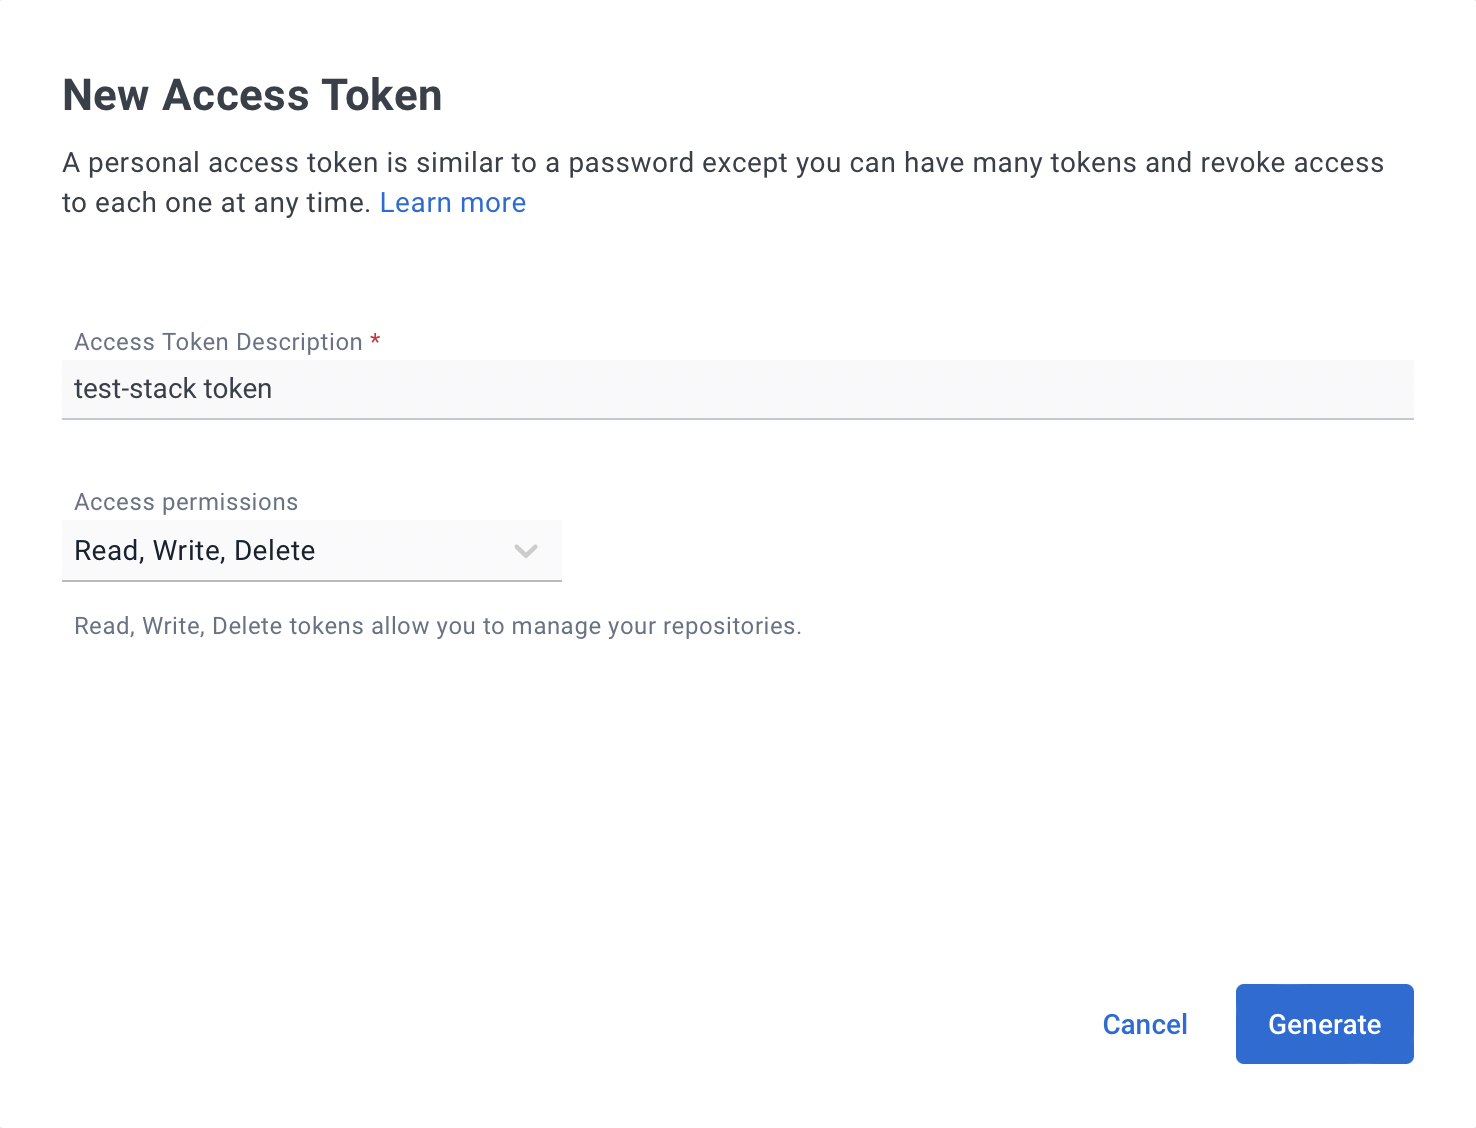 Docker Hub - New Access Token page with the name field set to "test-stack token"